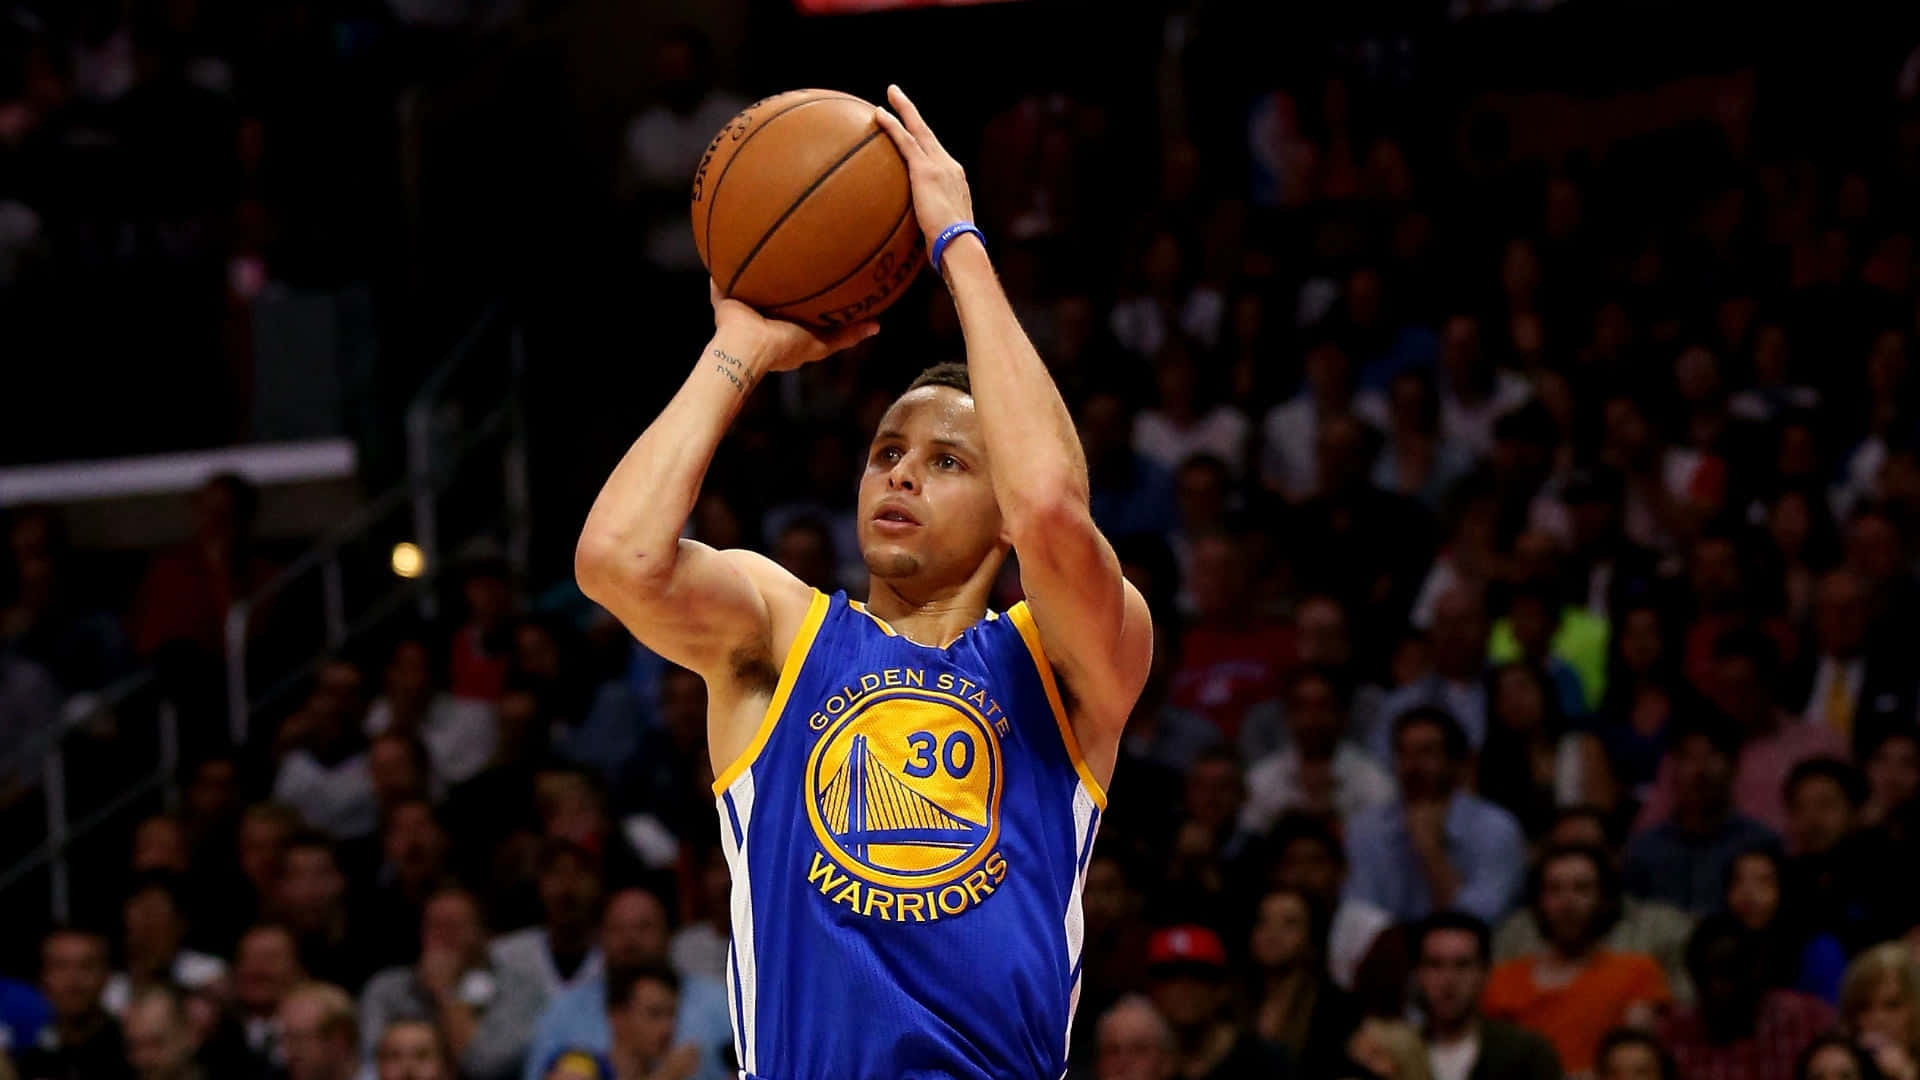 Denustoppelige Steph Curry